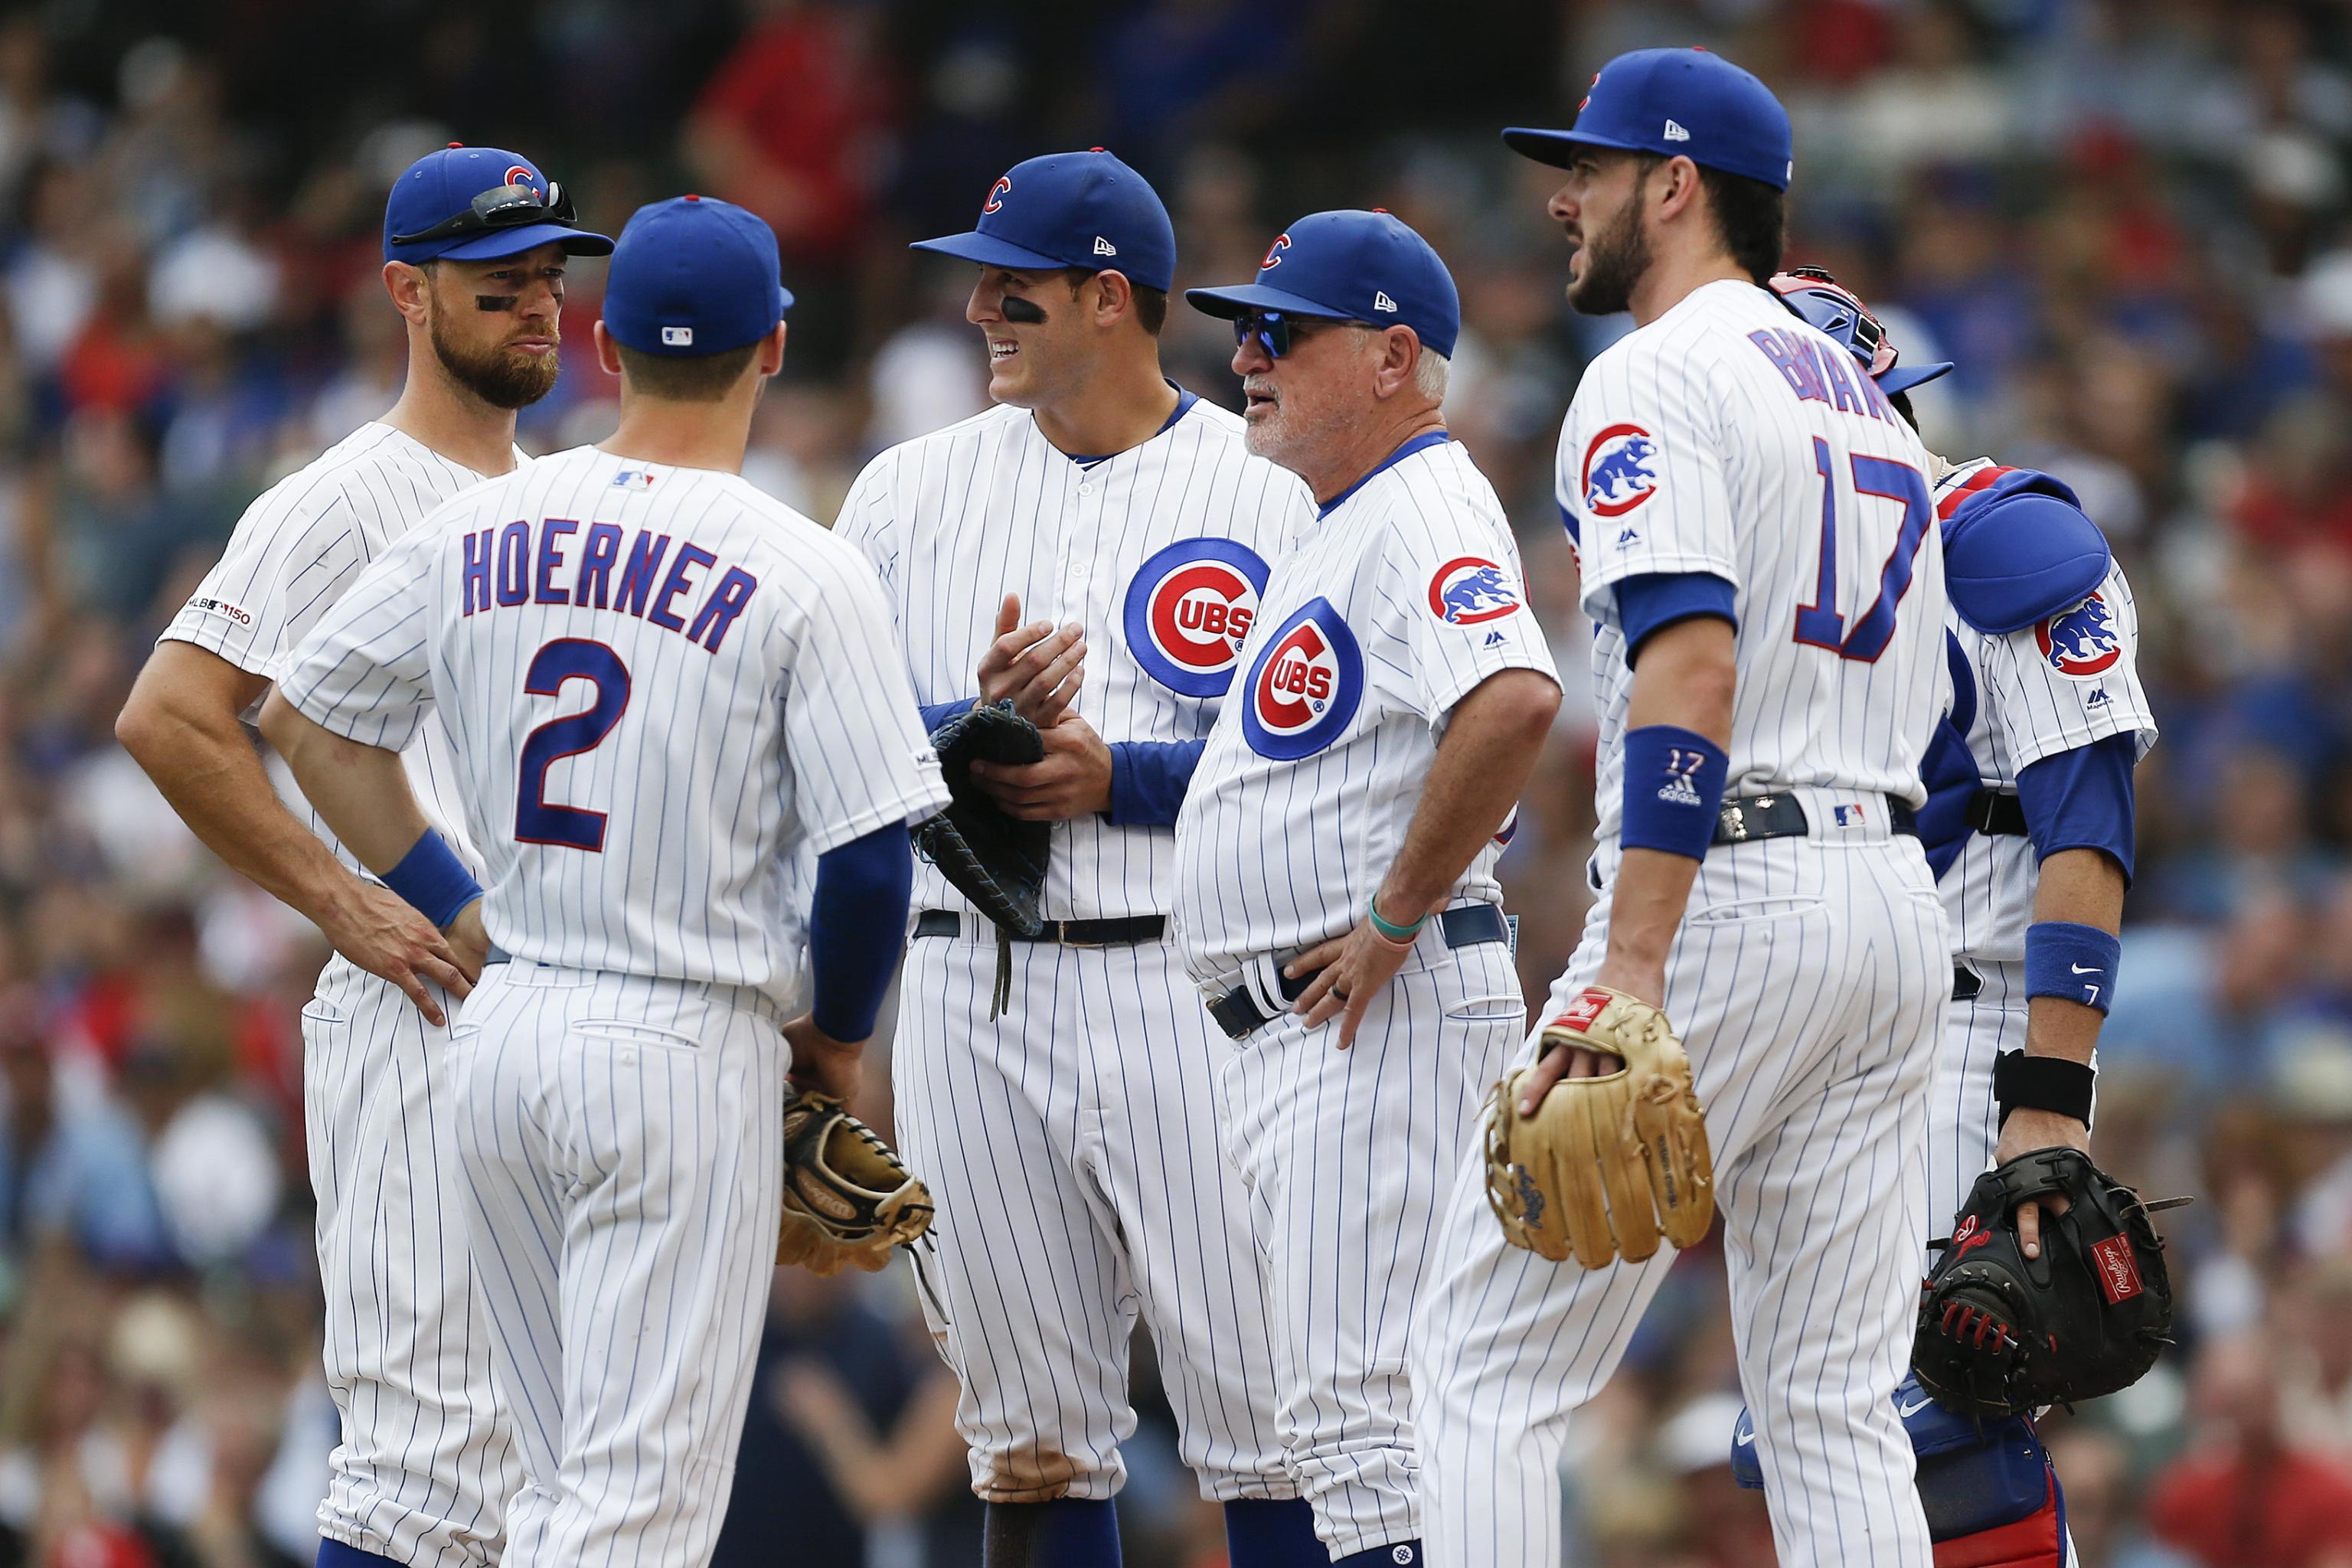 Cubs Facing a Tumultuous Offseason After Epic September Collapse